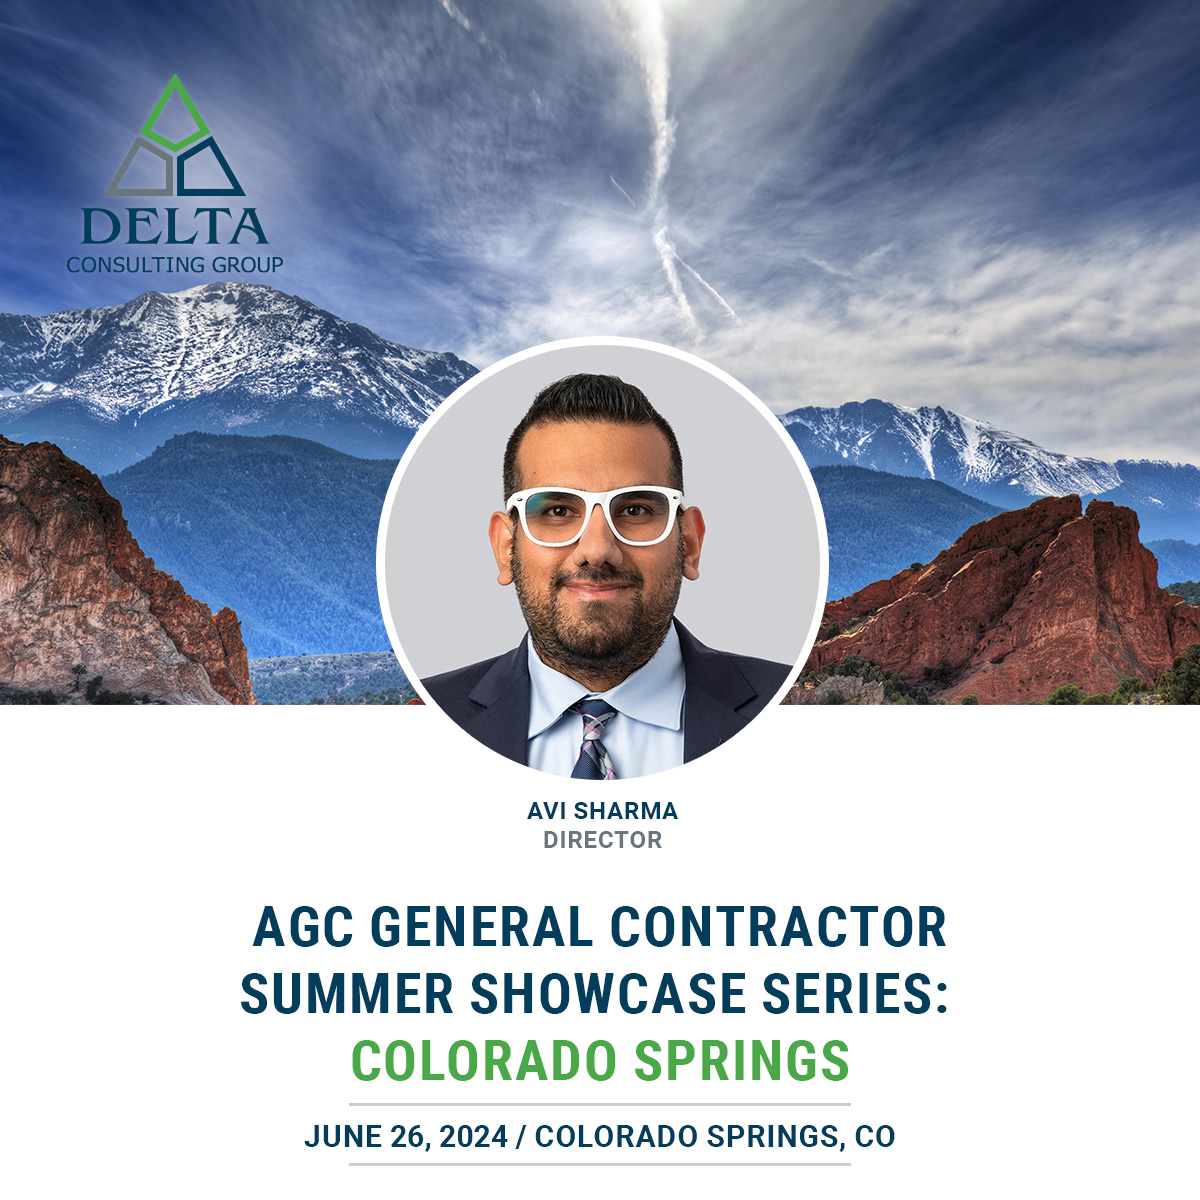 AGCGeneralContractorSummerShowcaseSeriesColoradoSprings - Delta Consulting Group